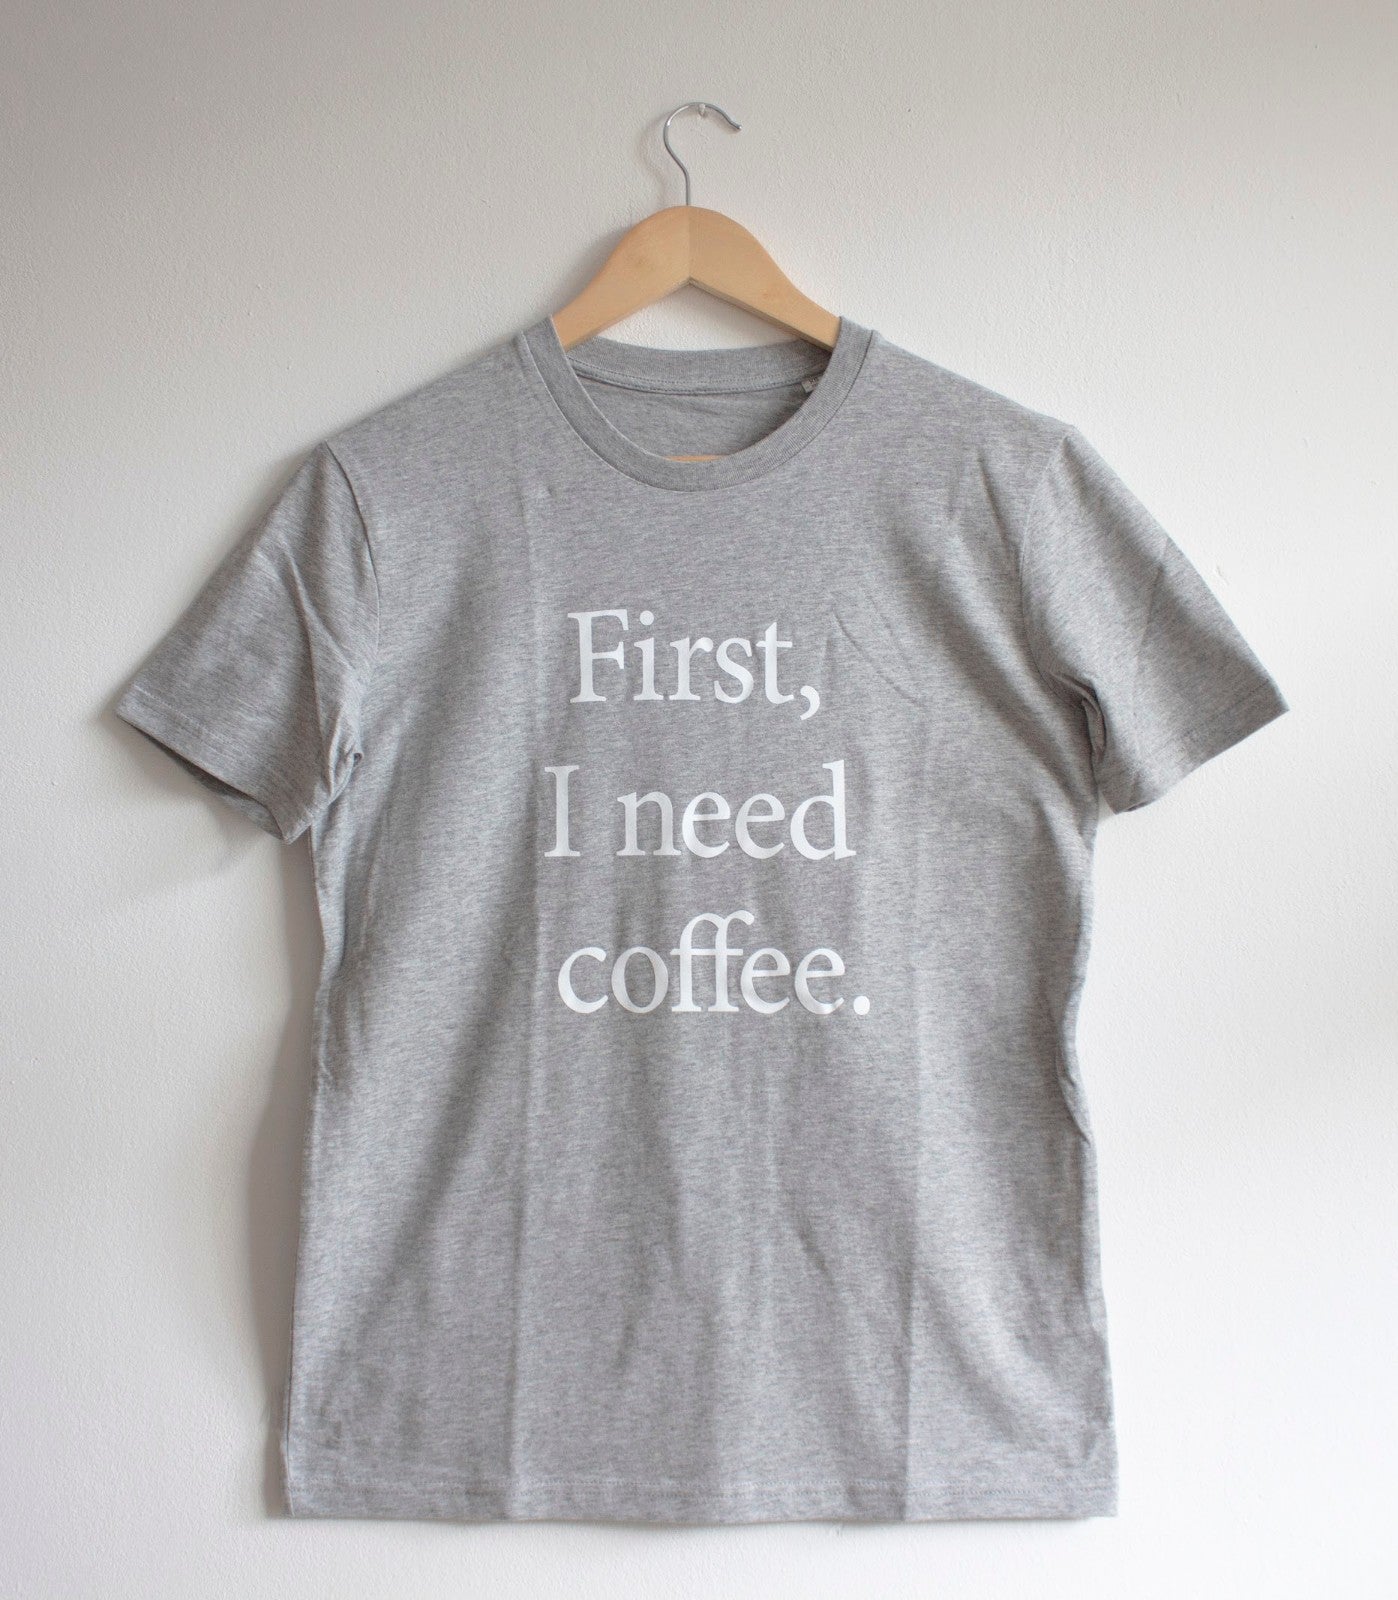 FIRST I NEED COFFEE T-SHIRT - Choose color